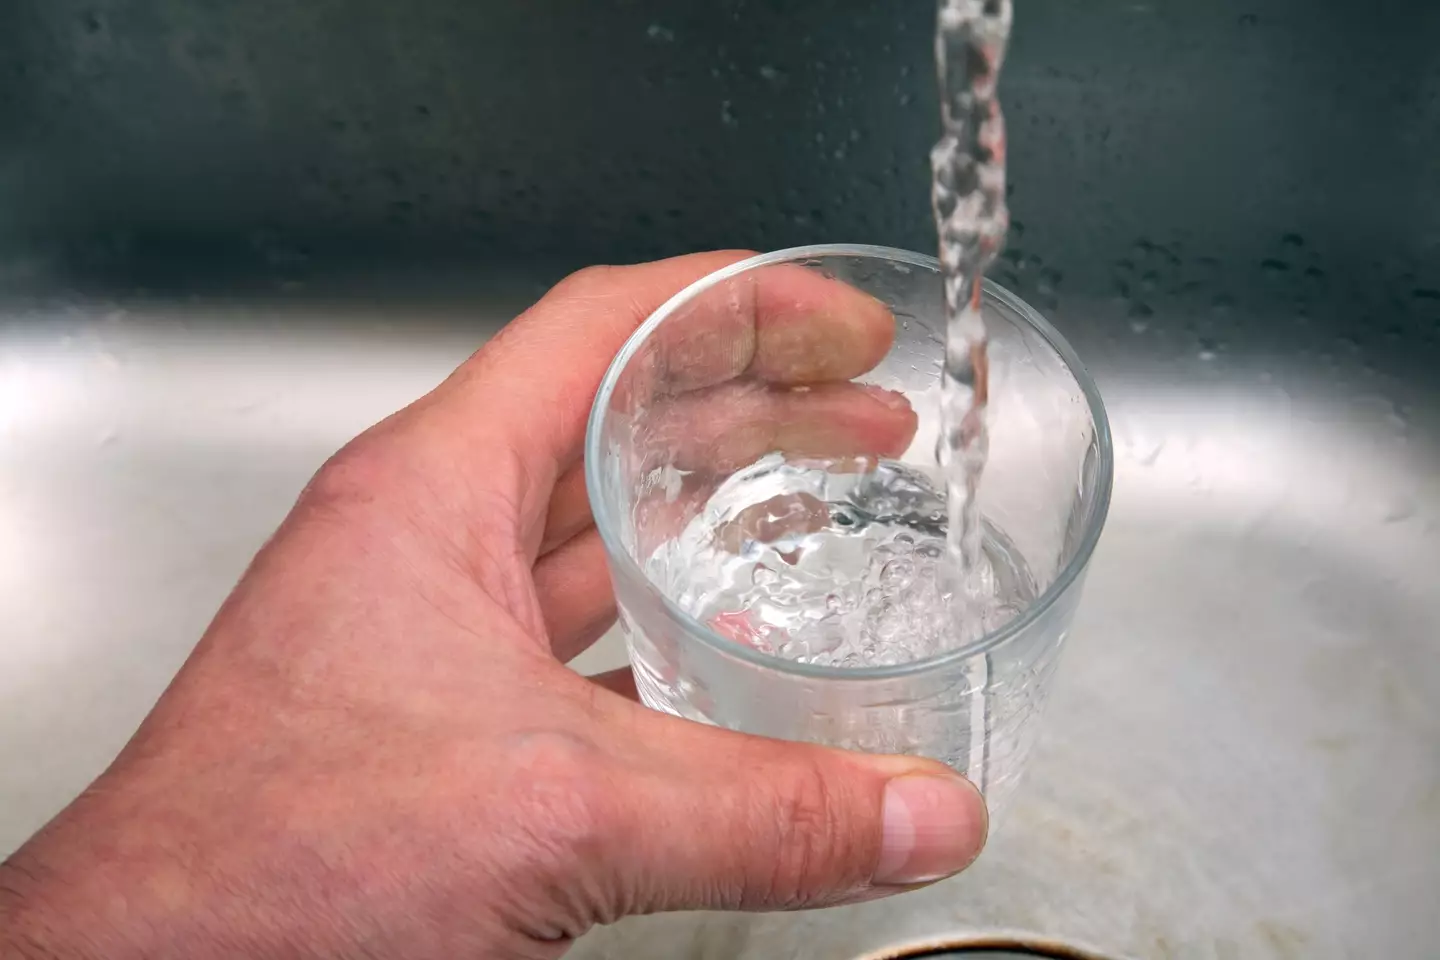 Of course, tap water is still extremely safe to drink.